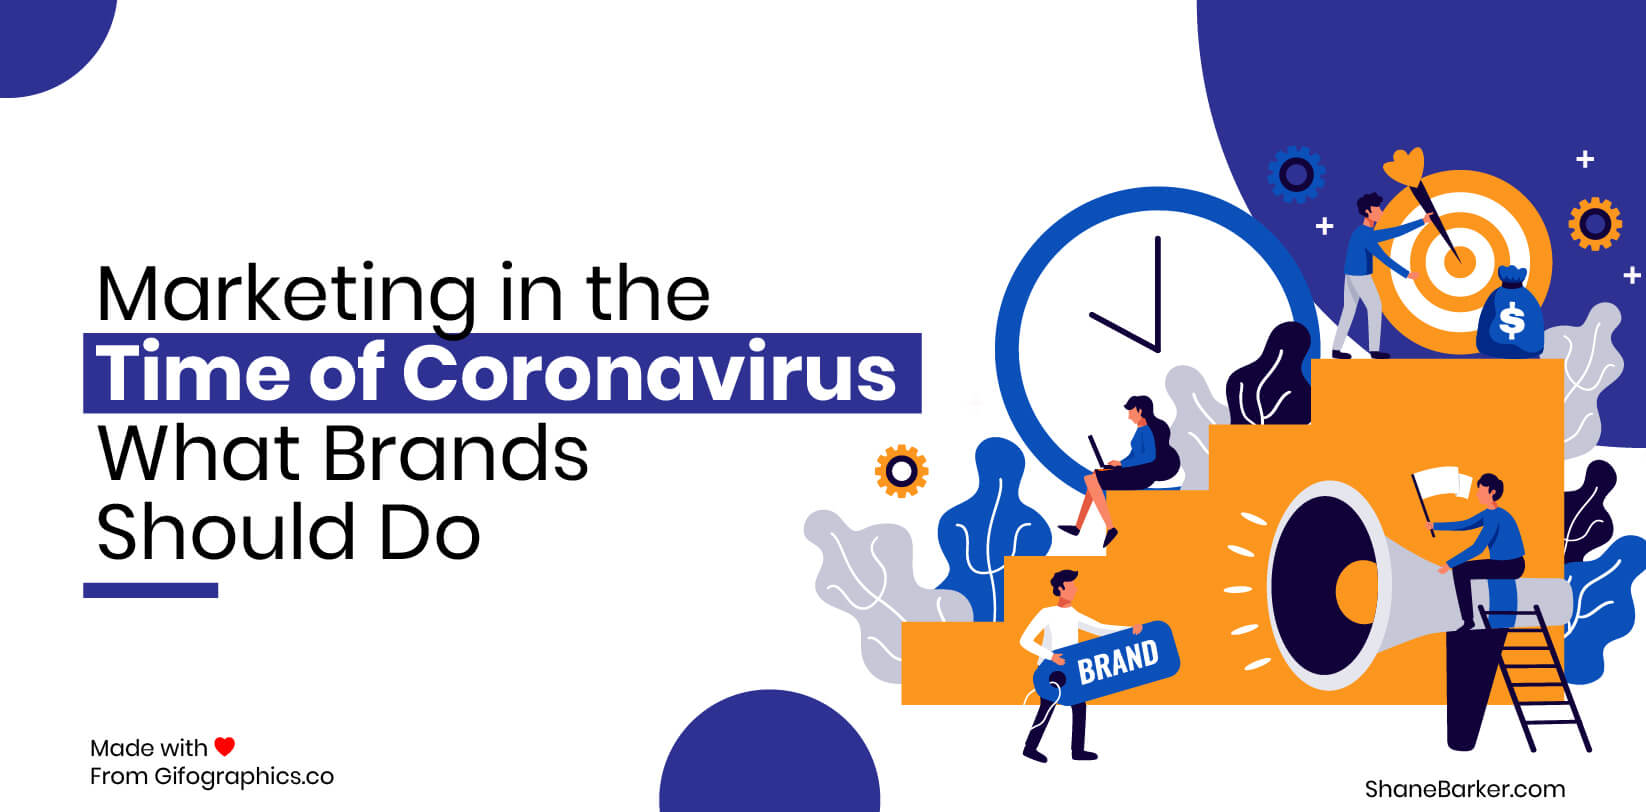 Marketing in the Time of Coronavirus What Brands Should Do